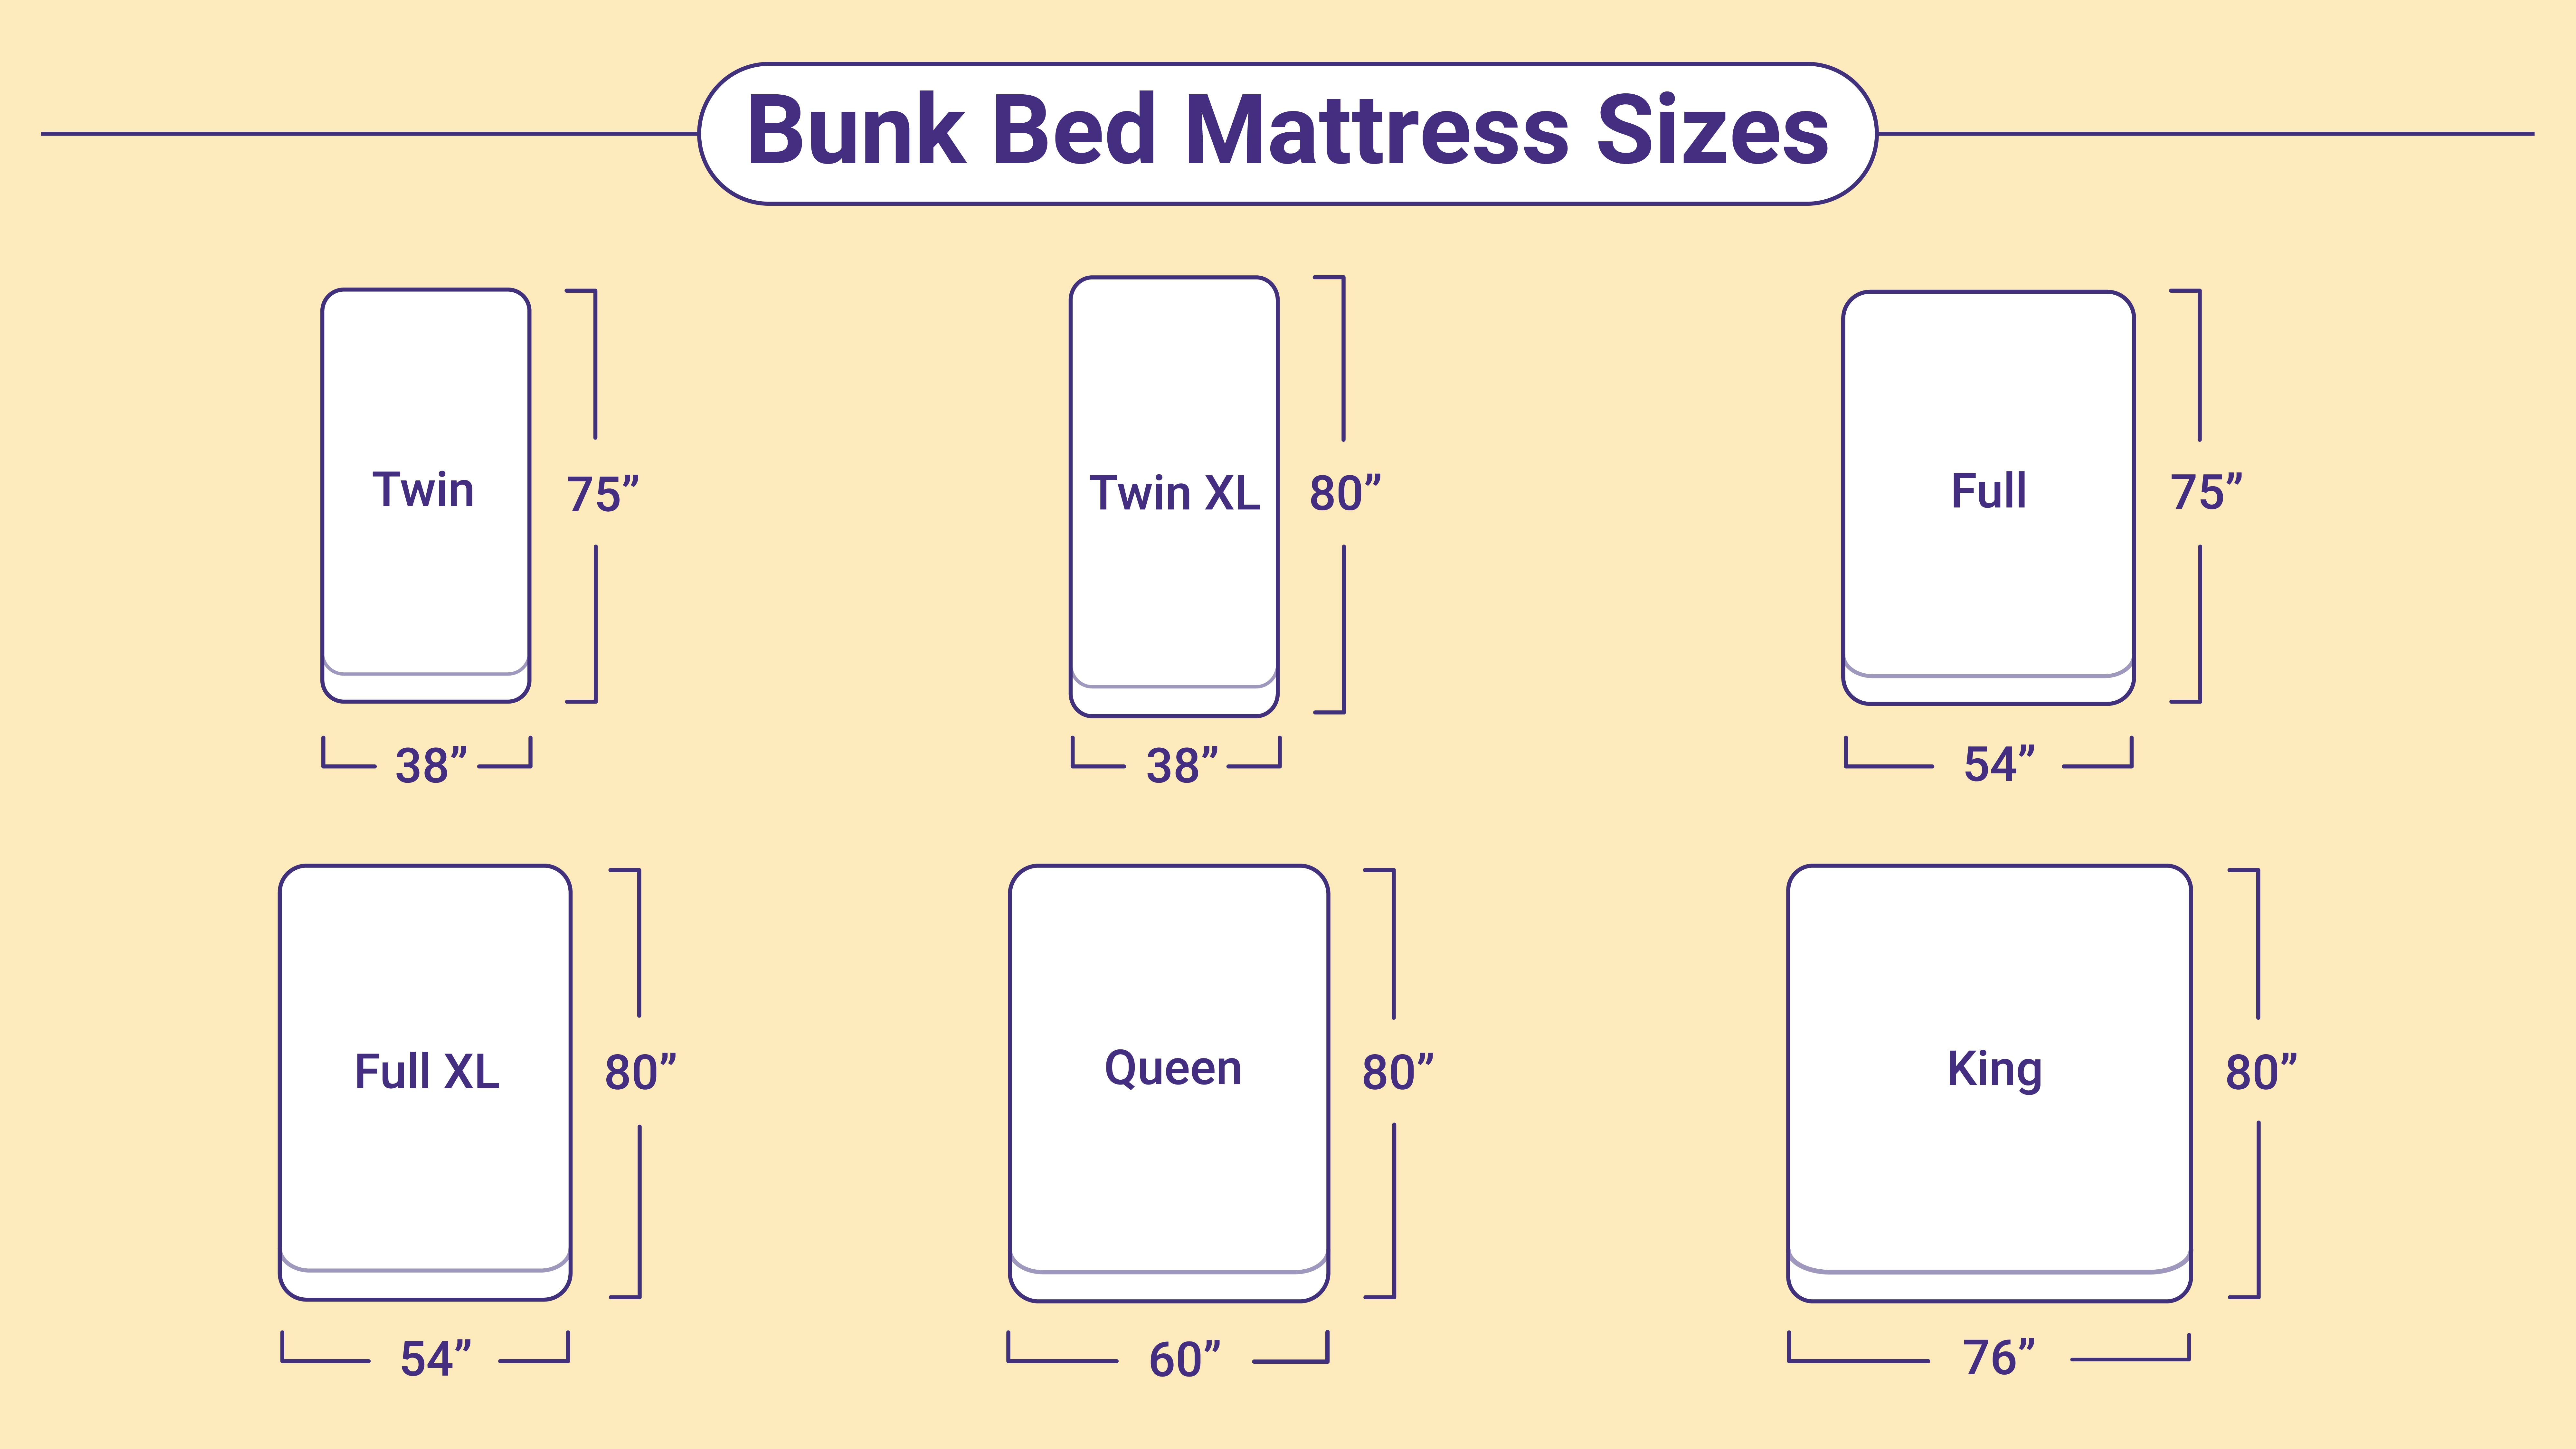 Bunk Bed Mattress Sizes And Dimensions, Bunk Bed Frame Dimensions